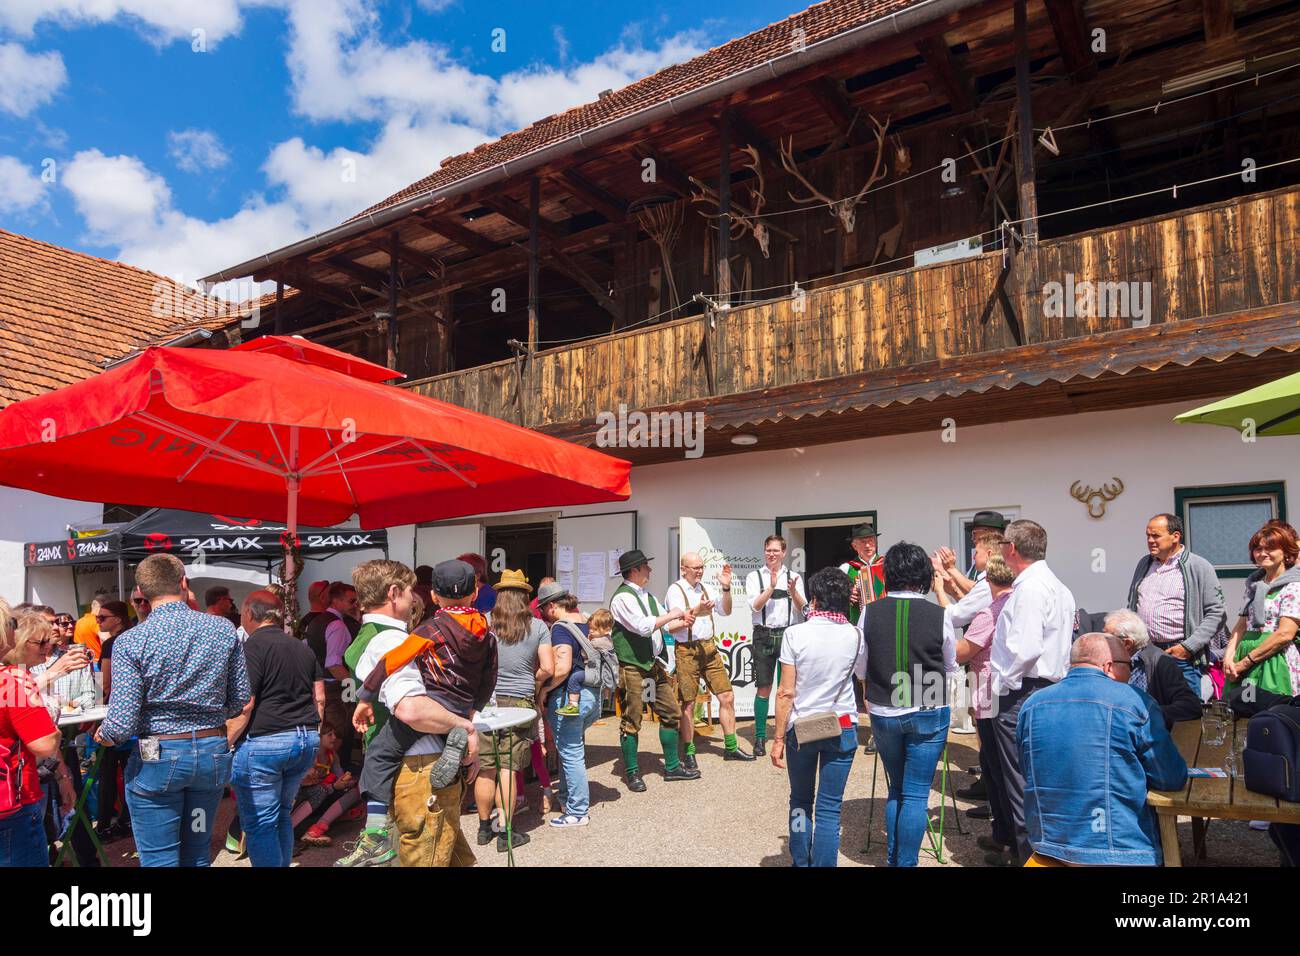 Puch bei Weiz: Fattoria Obstbau Berger, Apfelland (paese delle mele), band musicale al Apfelblütenfest (Apple Blossom Festival) a Steirisches Thermenland Foto Stock